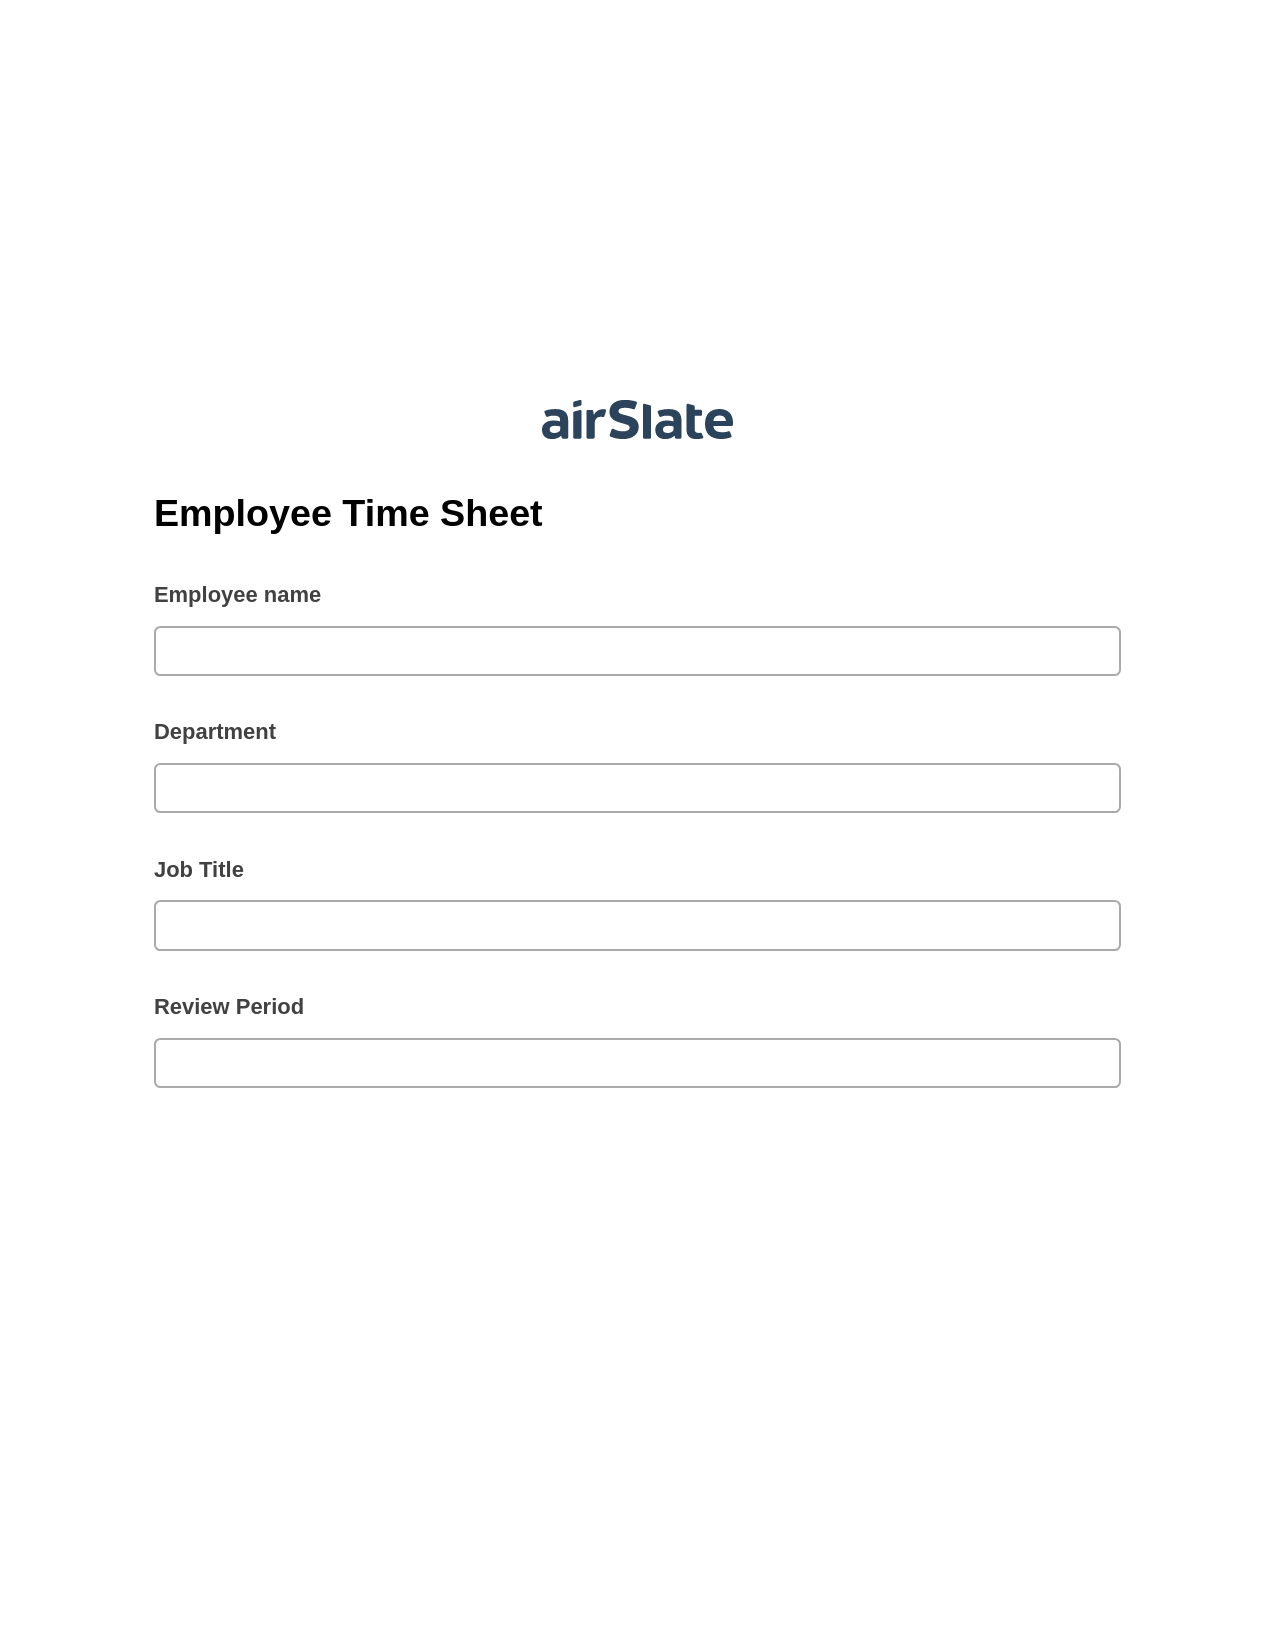 Multirole Employee Time Sheet Pre-fill Dropdowns from Airtable, Jira Bot, Archive to OneDrive Bot